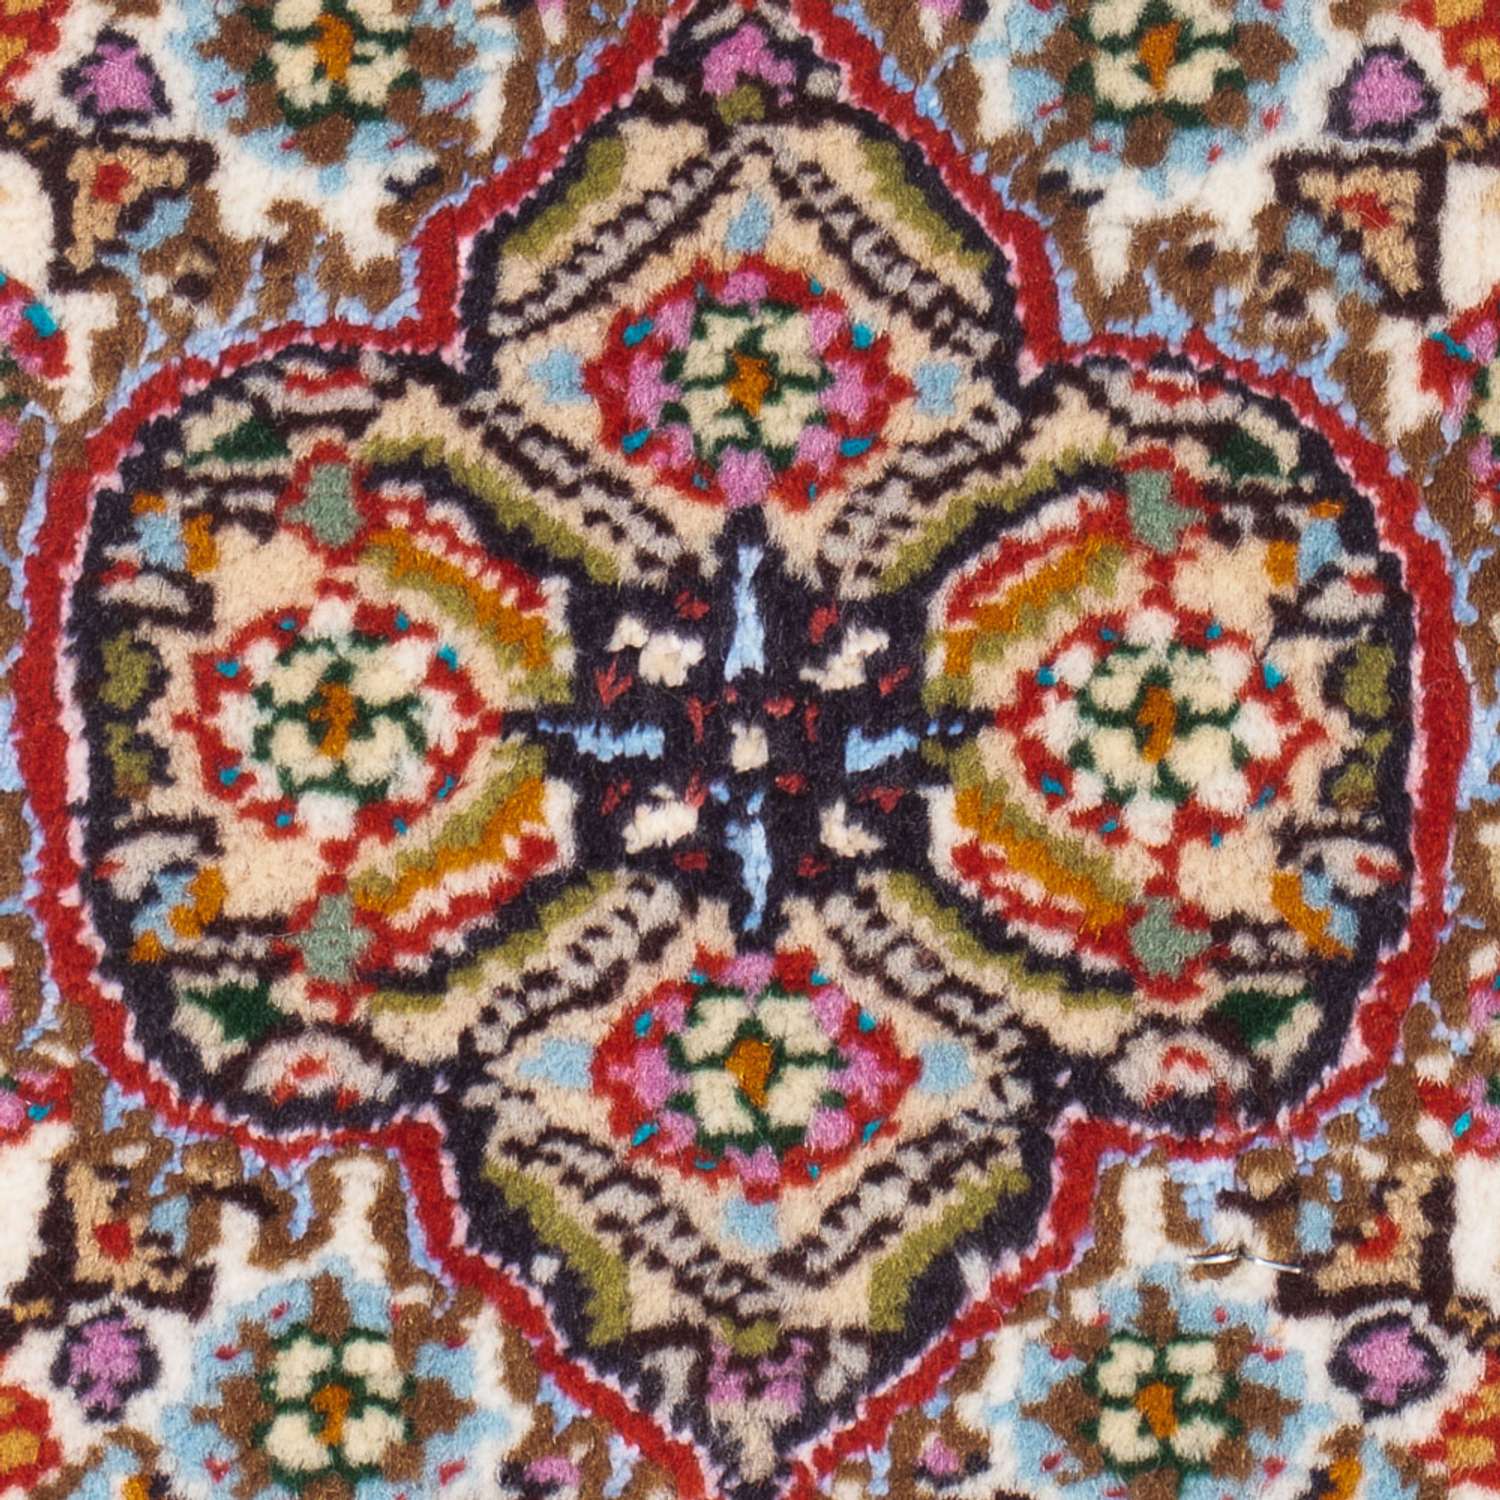 Perser Rug - Classic - Royal - 30 x 30 cm - multicolored